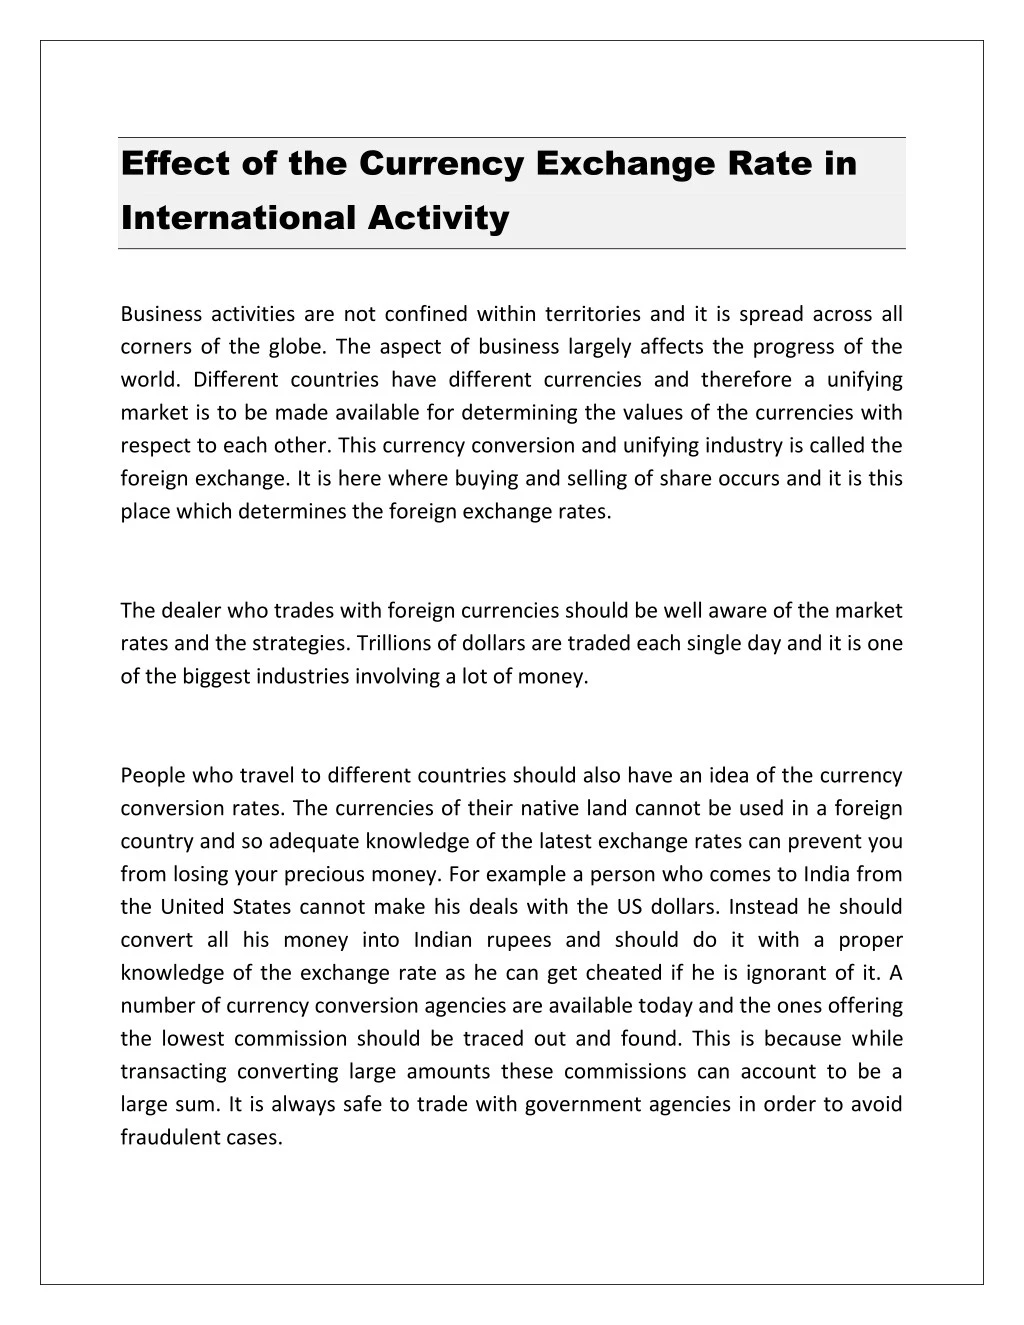 effect of the currency exchange rate